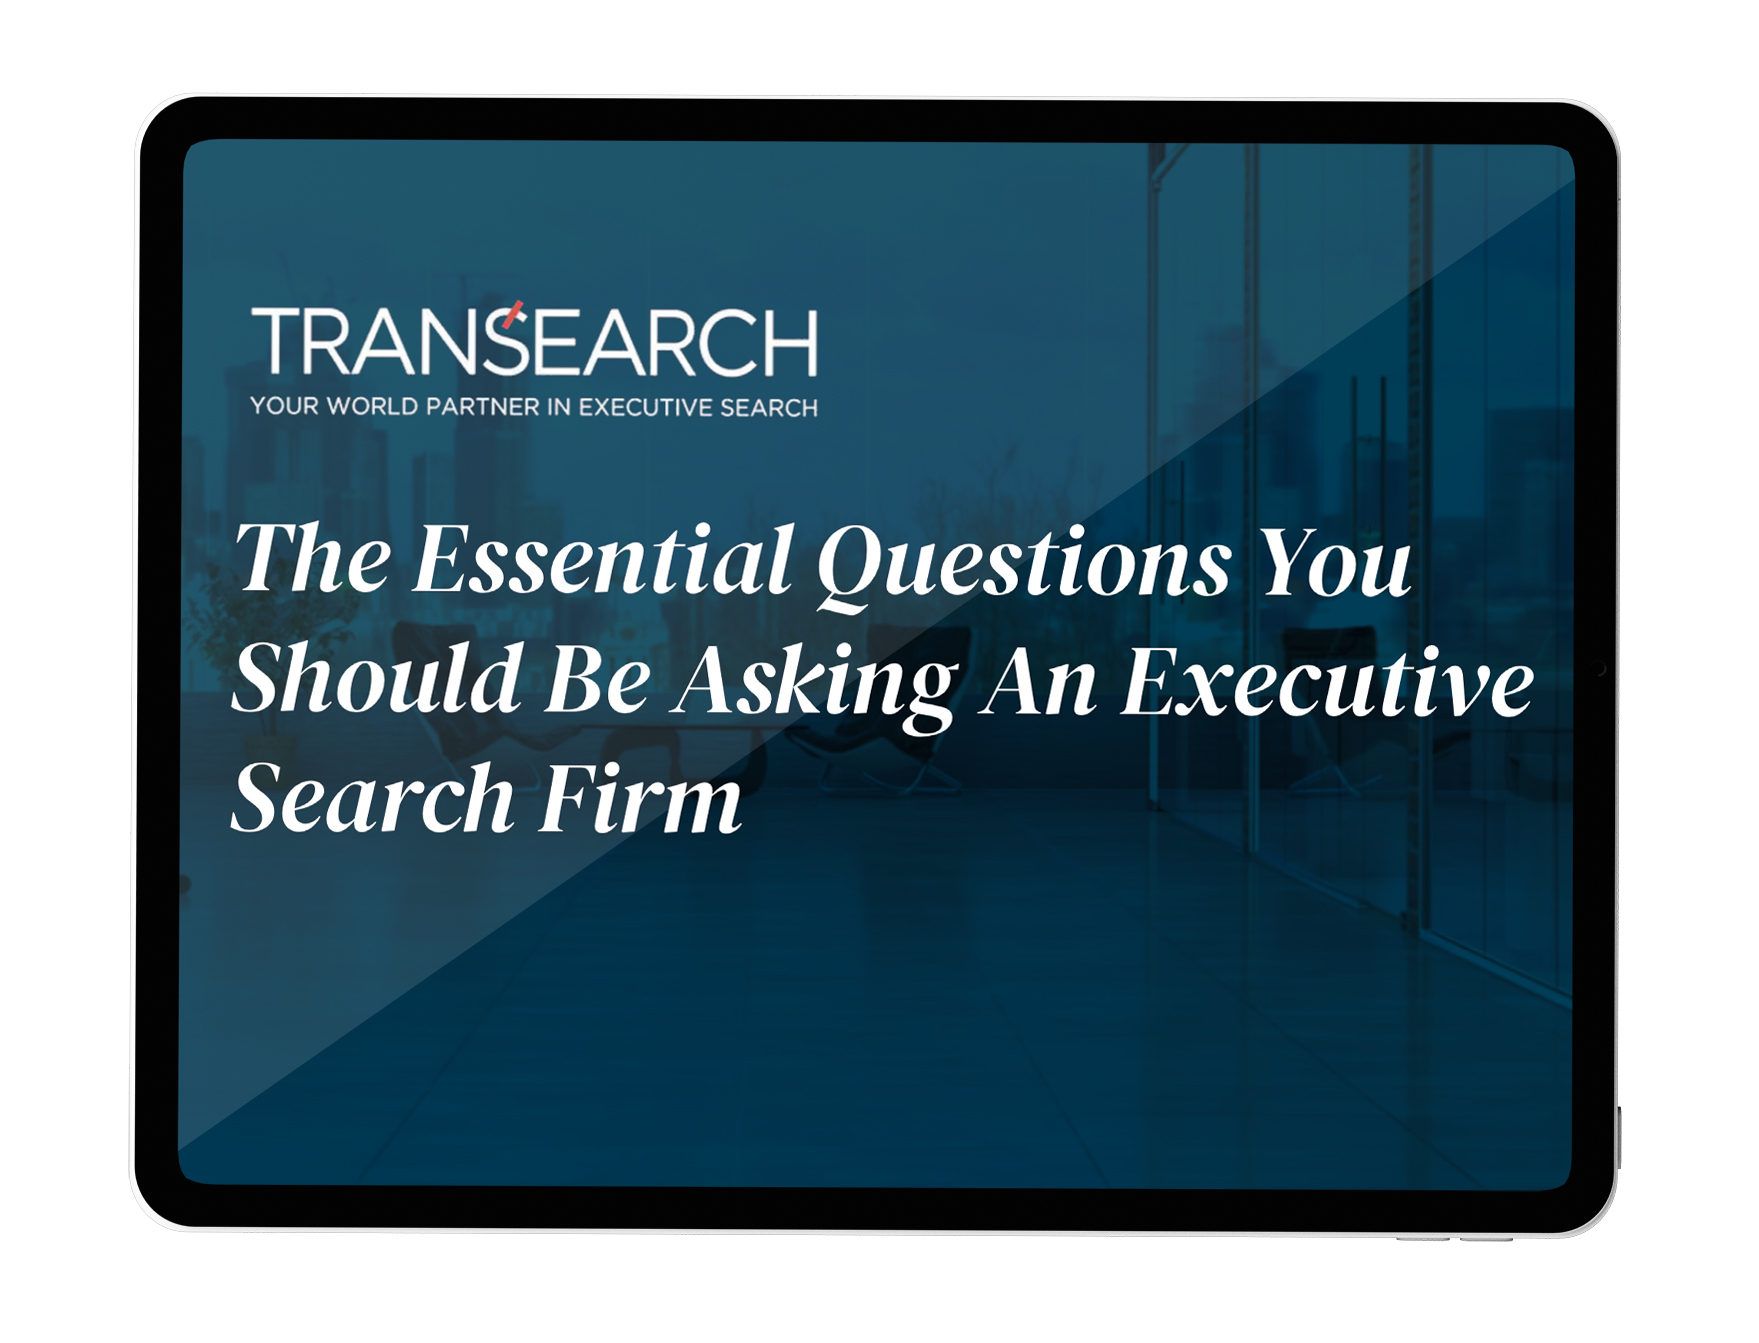 Questions You Should Be Asking An Executive Search Firm